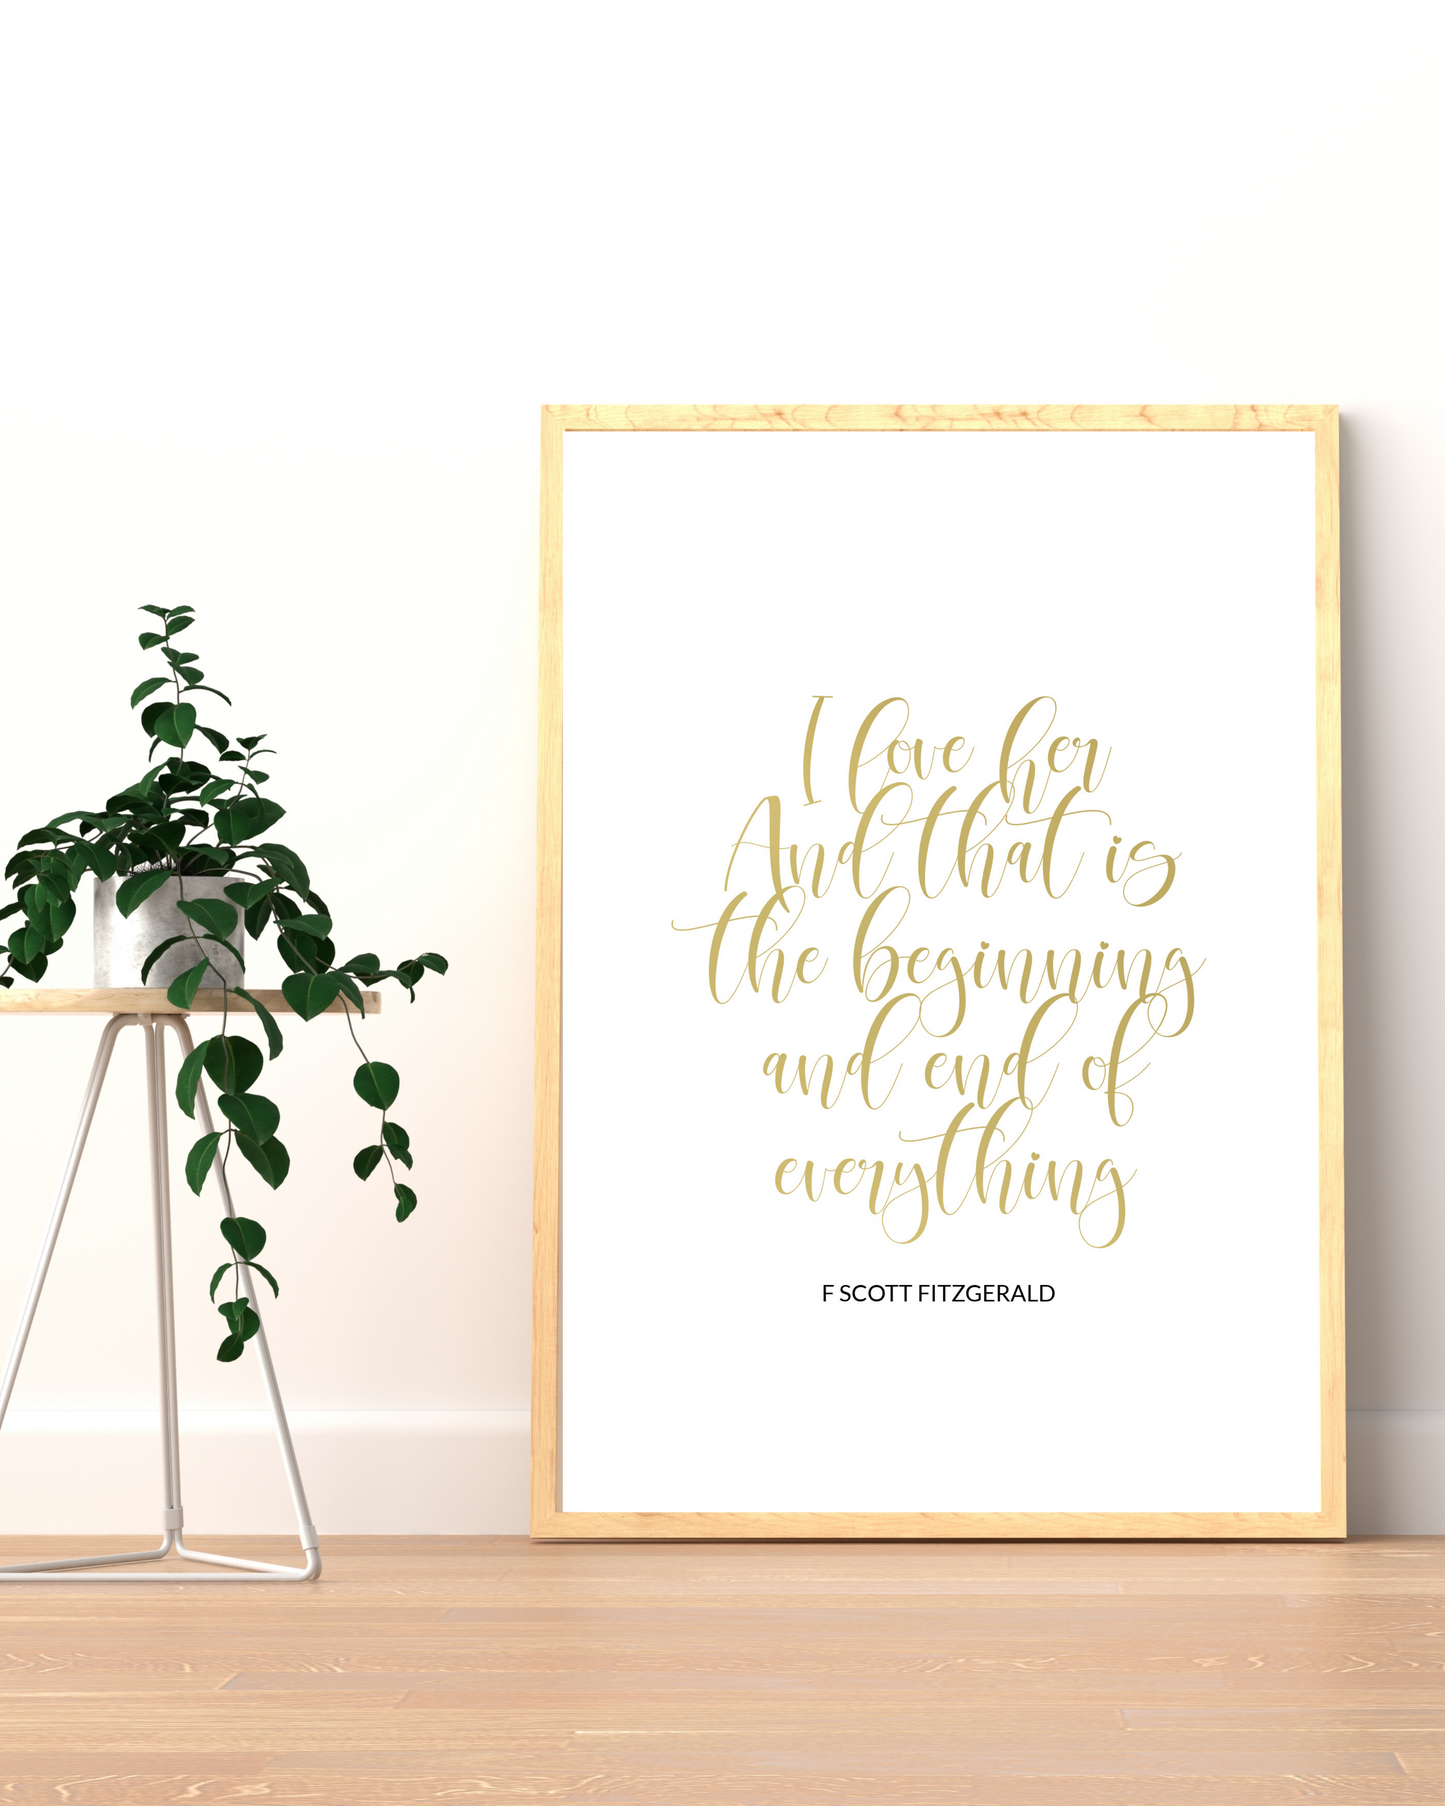 "I Love Her And That Is The Beginning And End Of Everything" Famous Quote By F. Scott Fitzgerald In Gold, Literary Quotes, Love Quotes, Printable Art